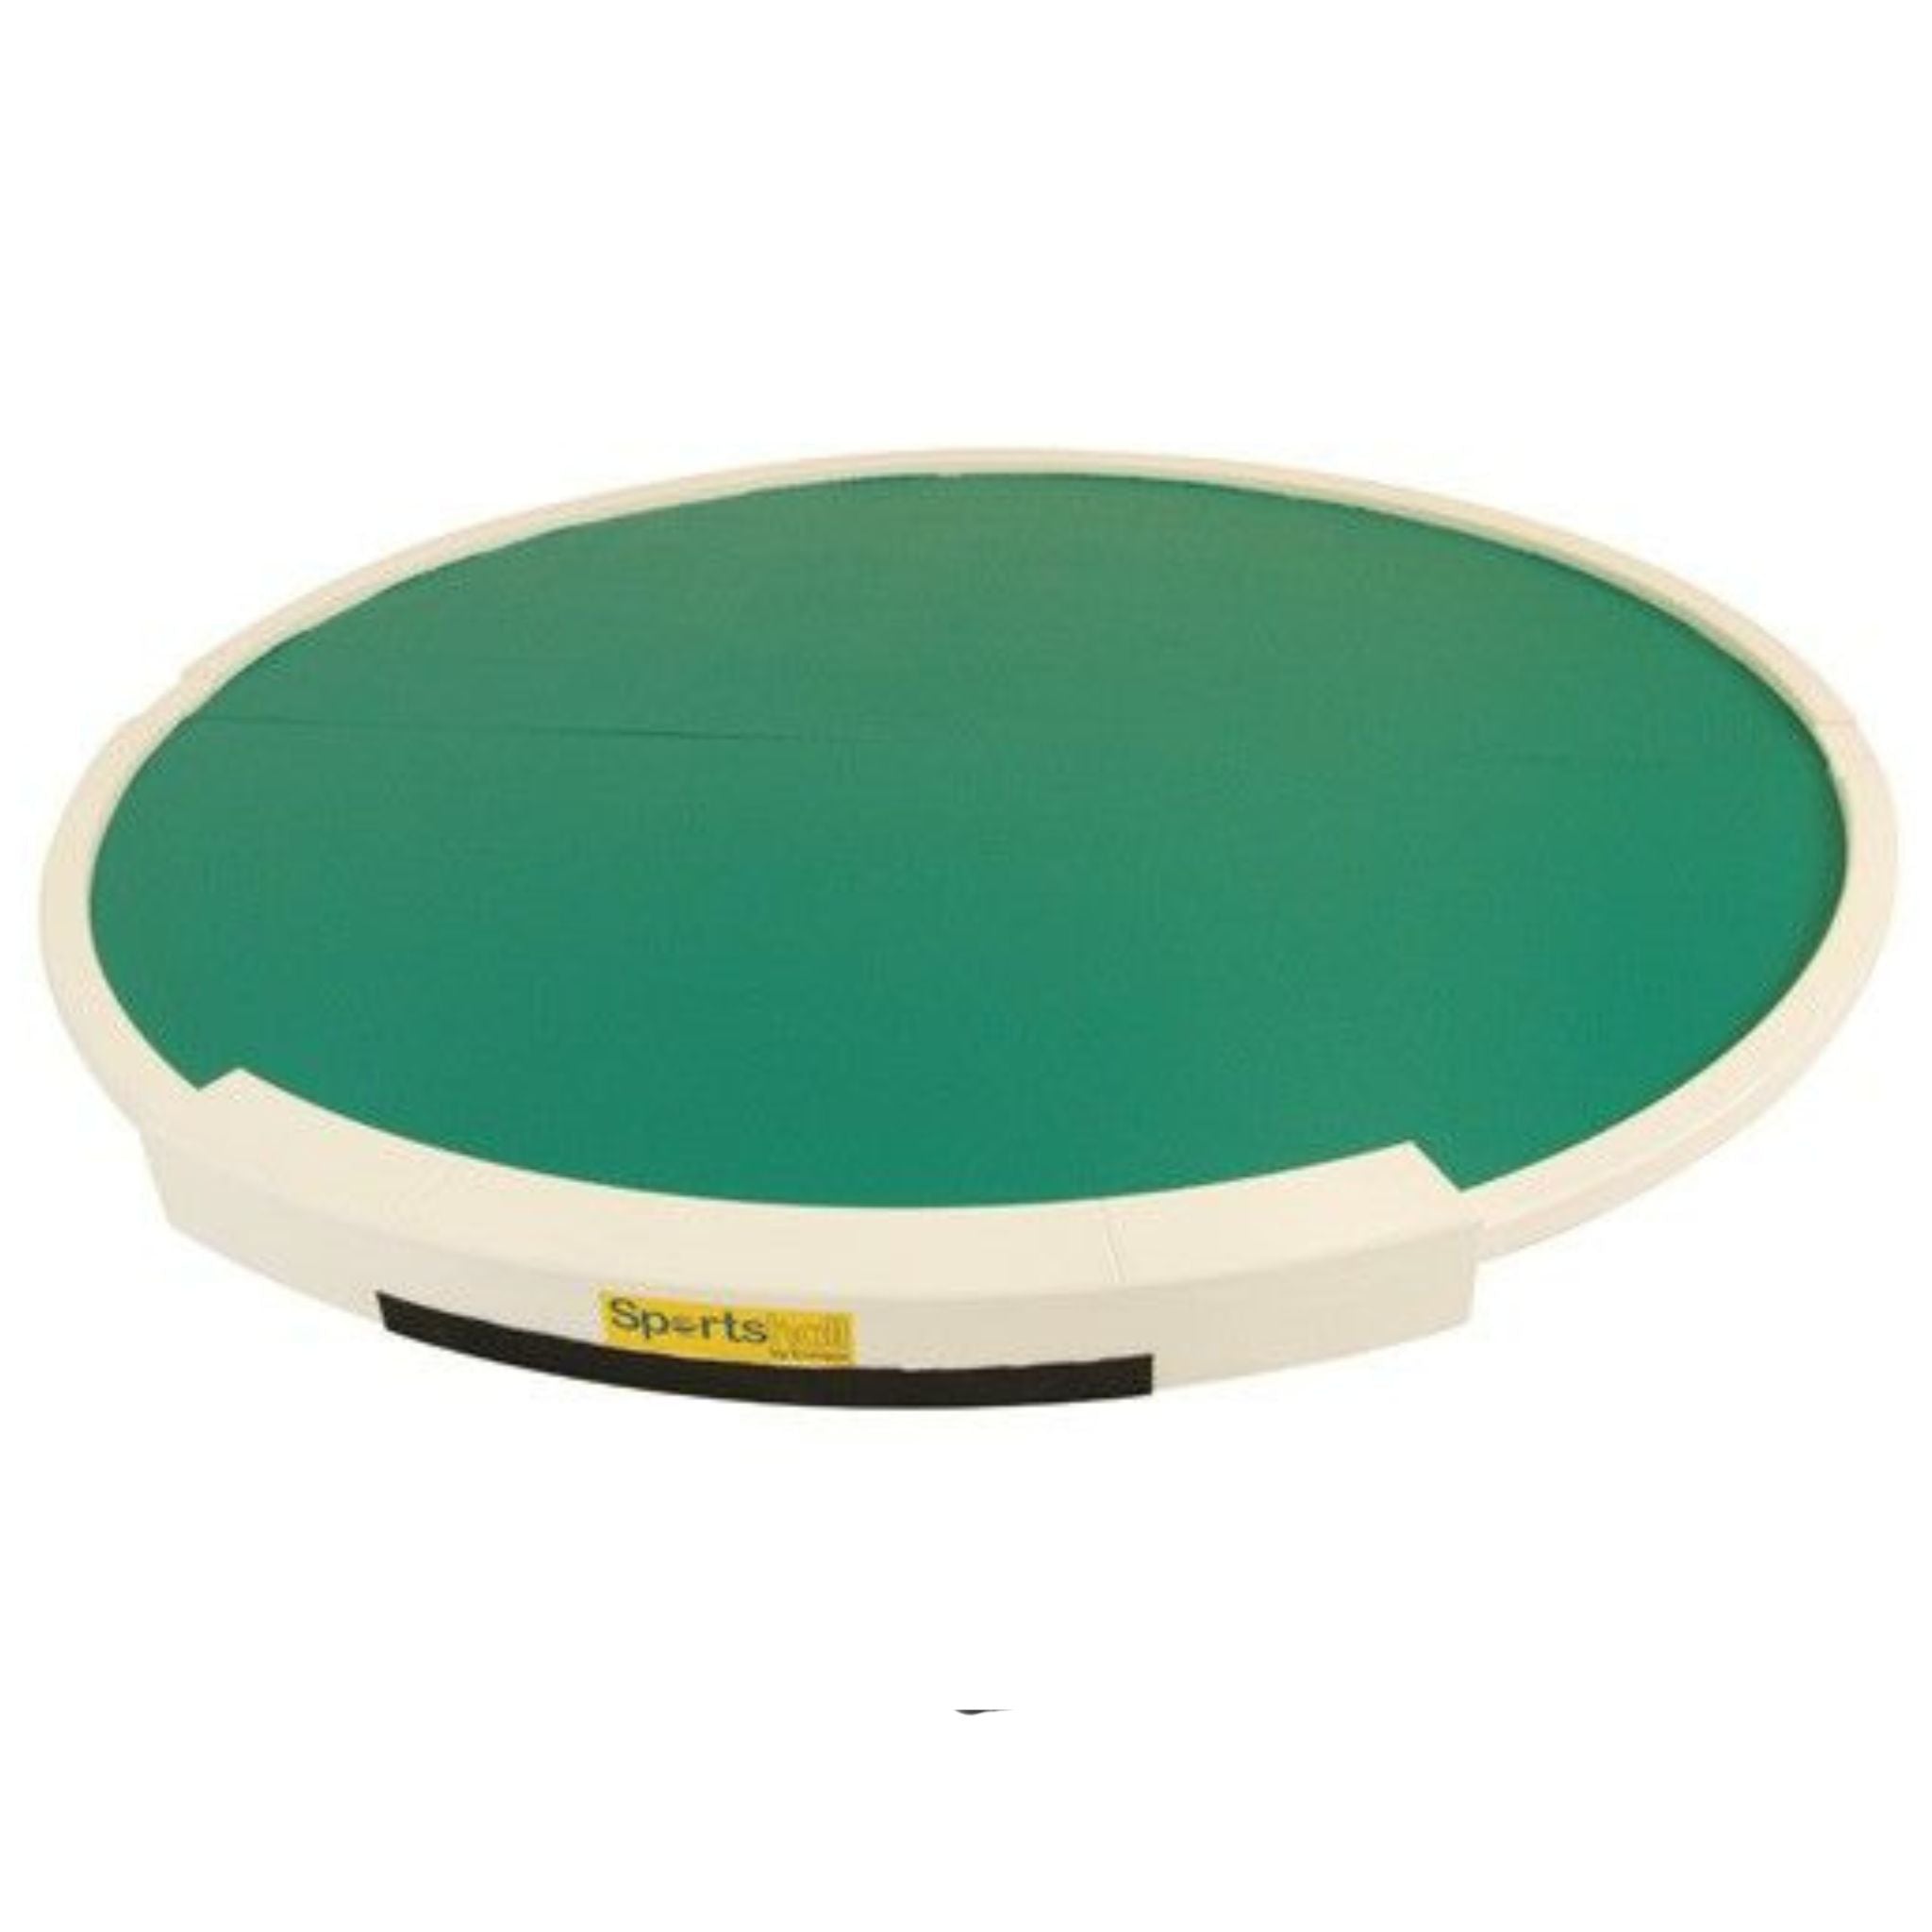 Indoor Shot Circle for SportsHall training.  With green top and white toe board